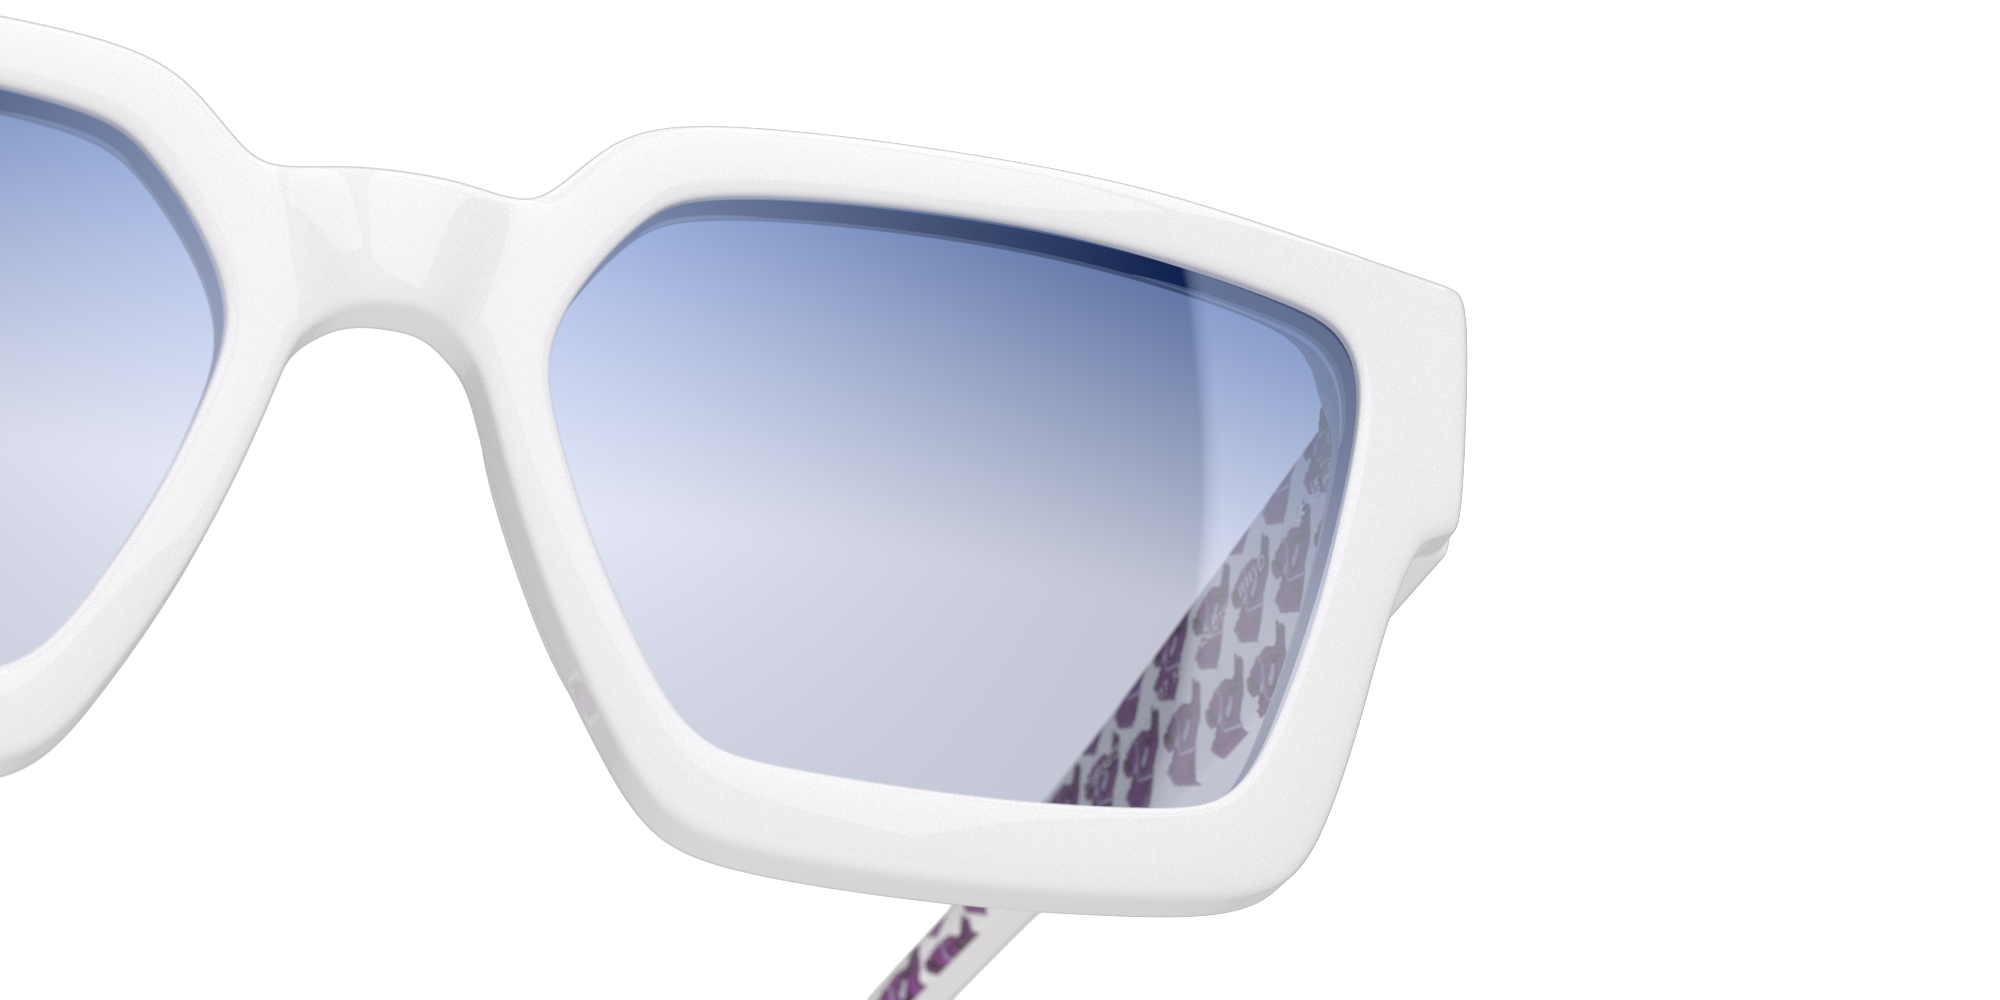 Detail01 Fortnite with Unofficial UNSU0150 Sunglasses Violet / White